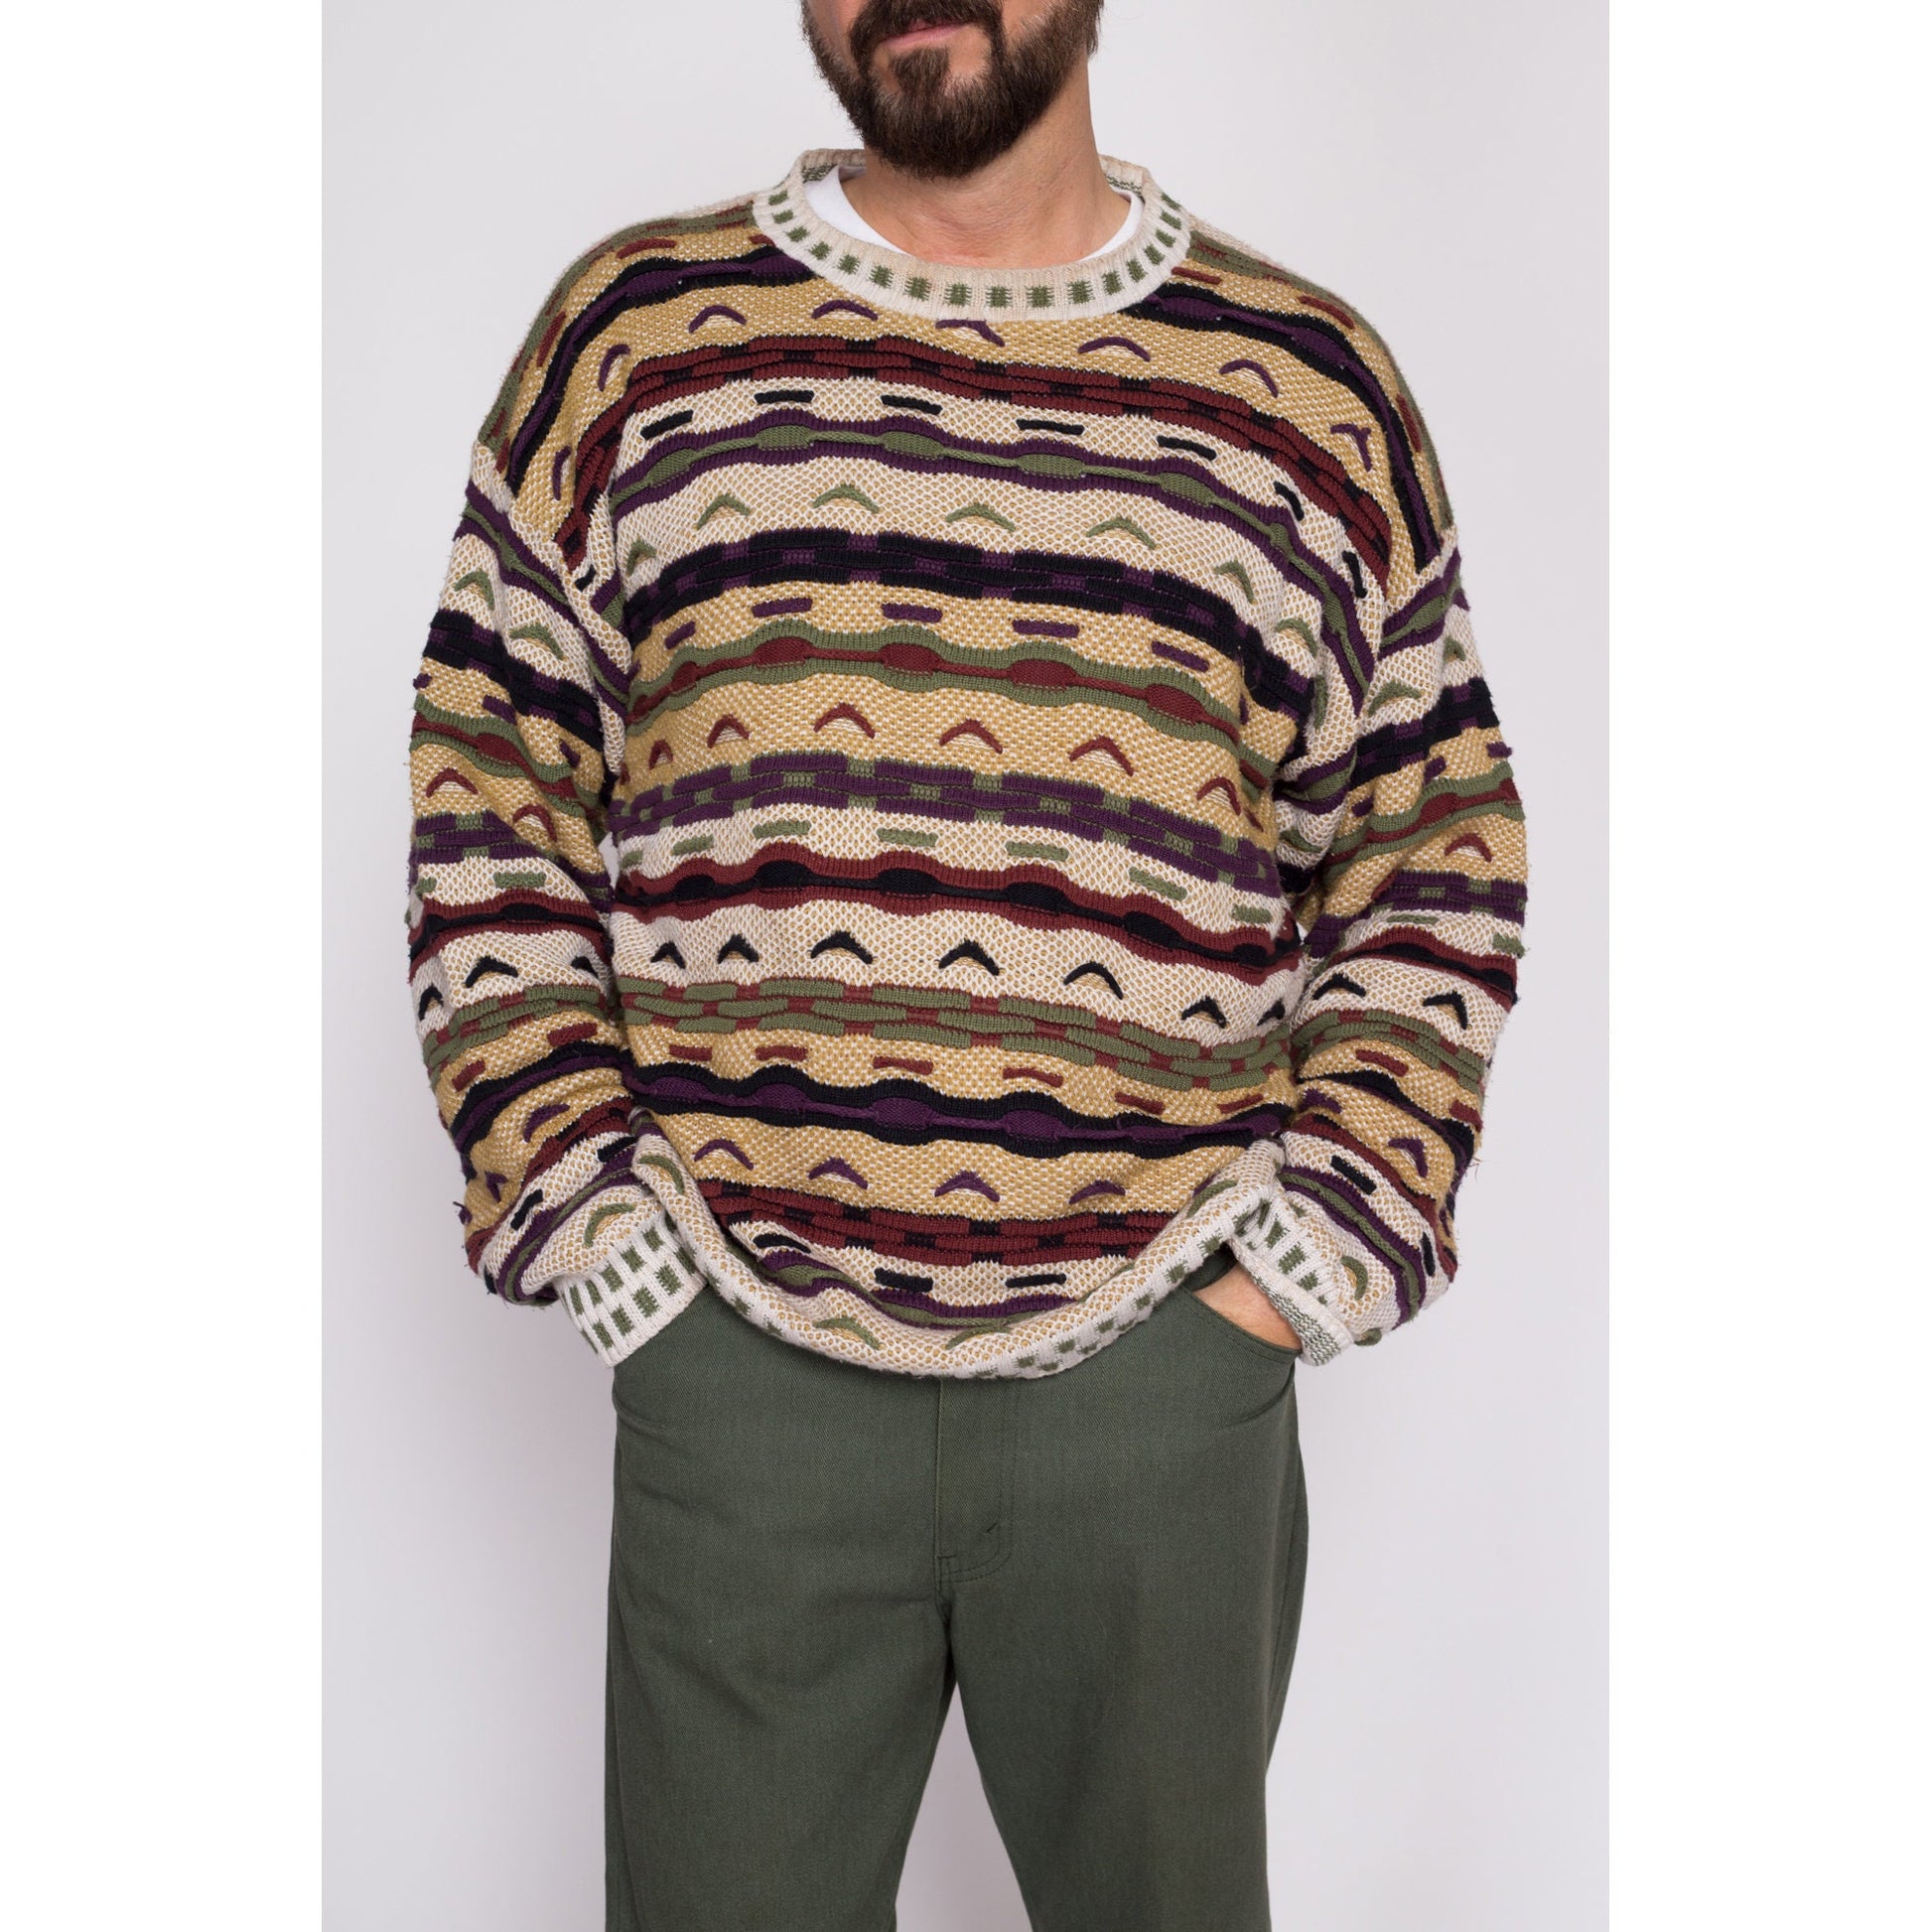 Large 90s Coogi Style 3D Knit Sweater | Vintage Textured Striped Knit Streetwear Pullover